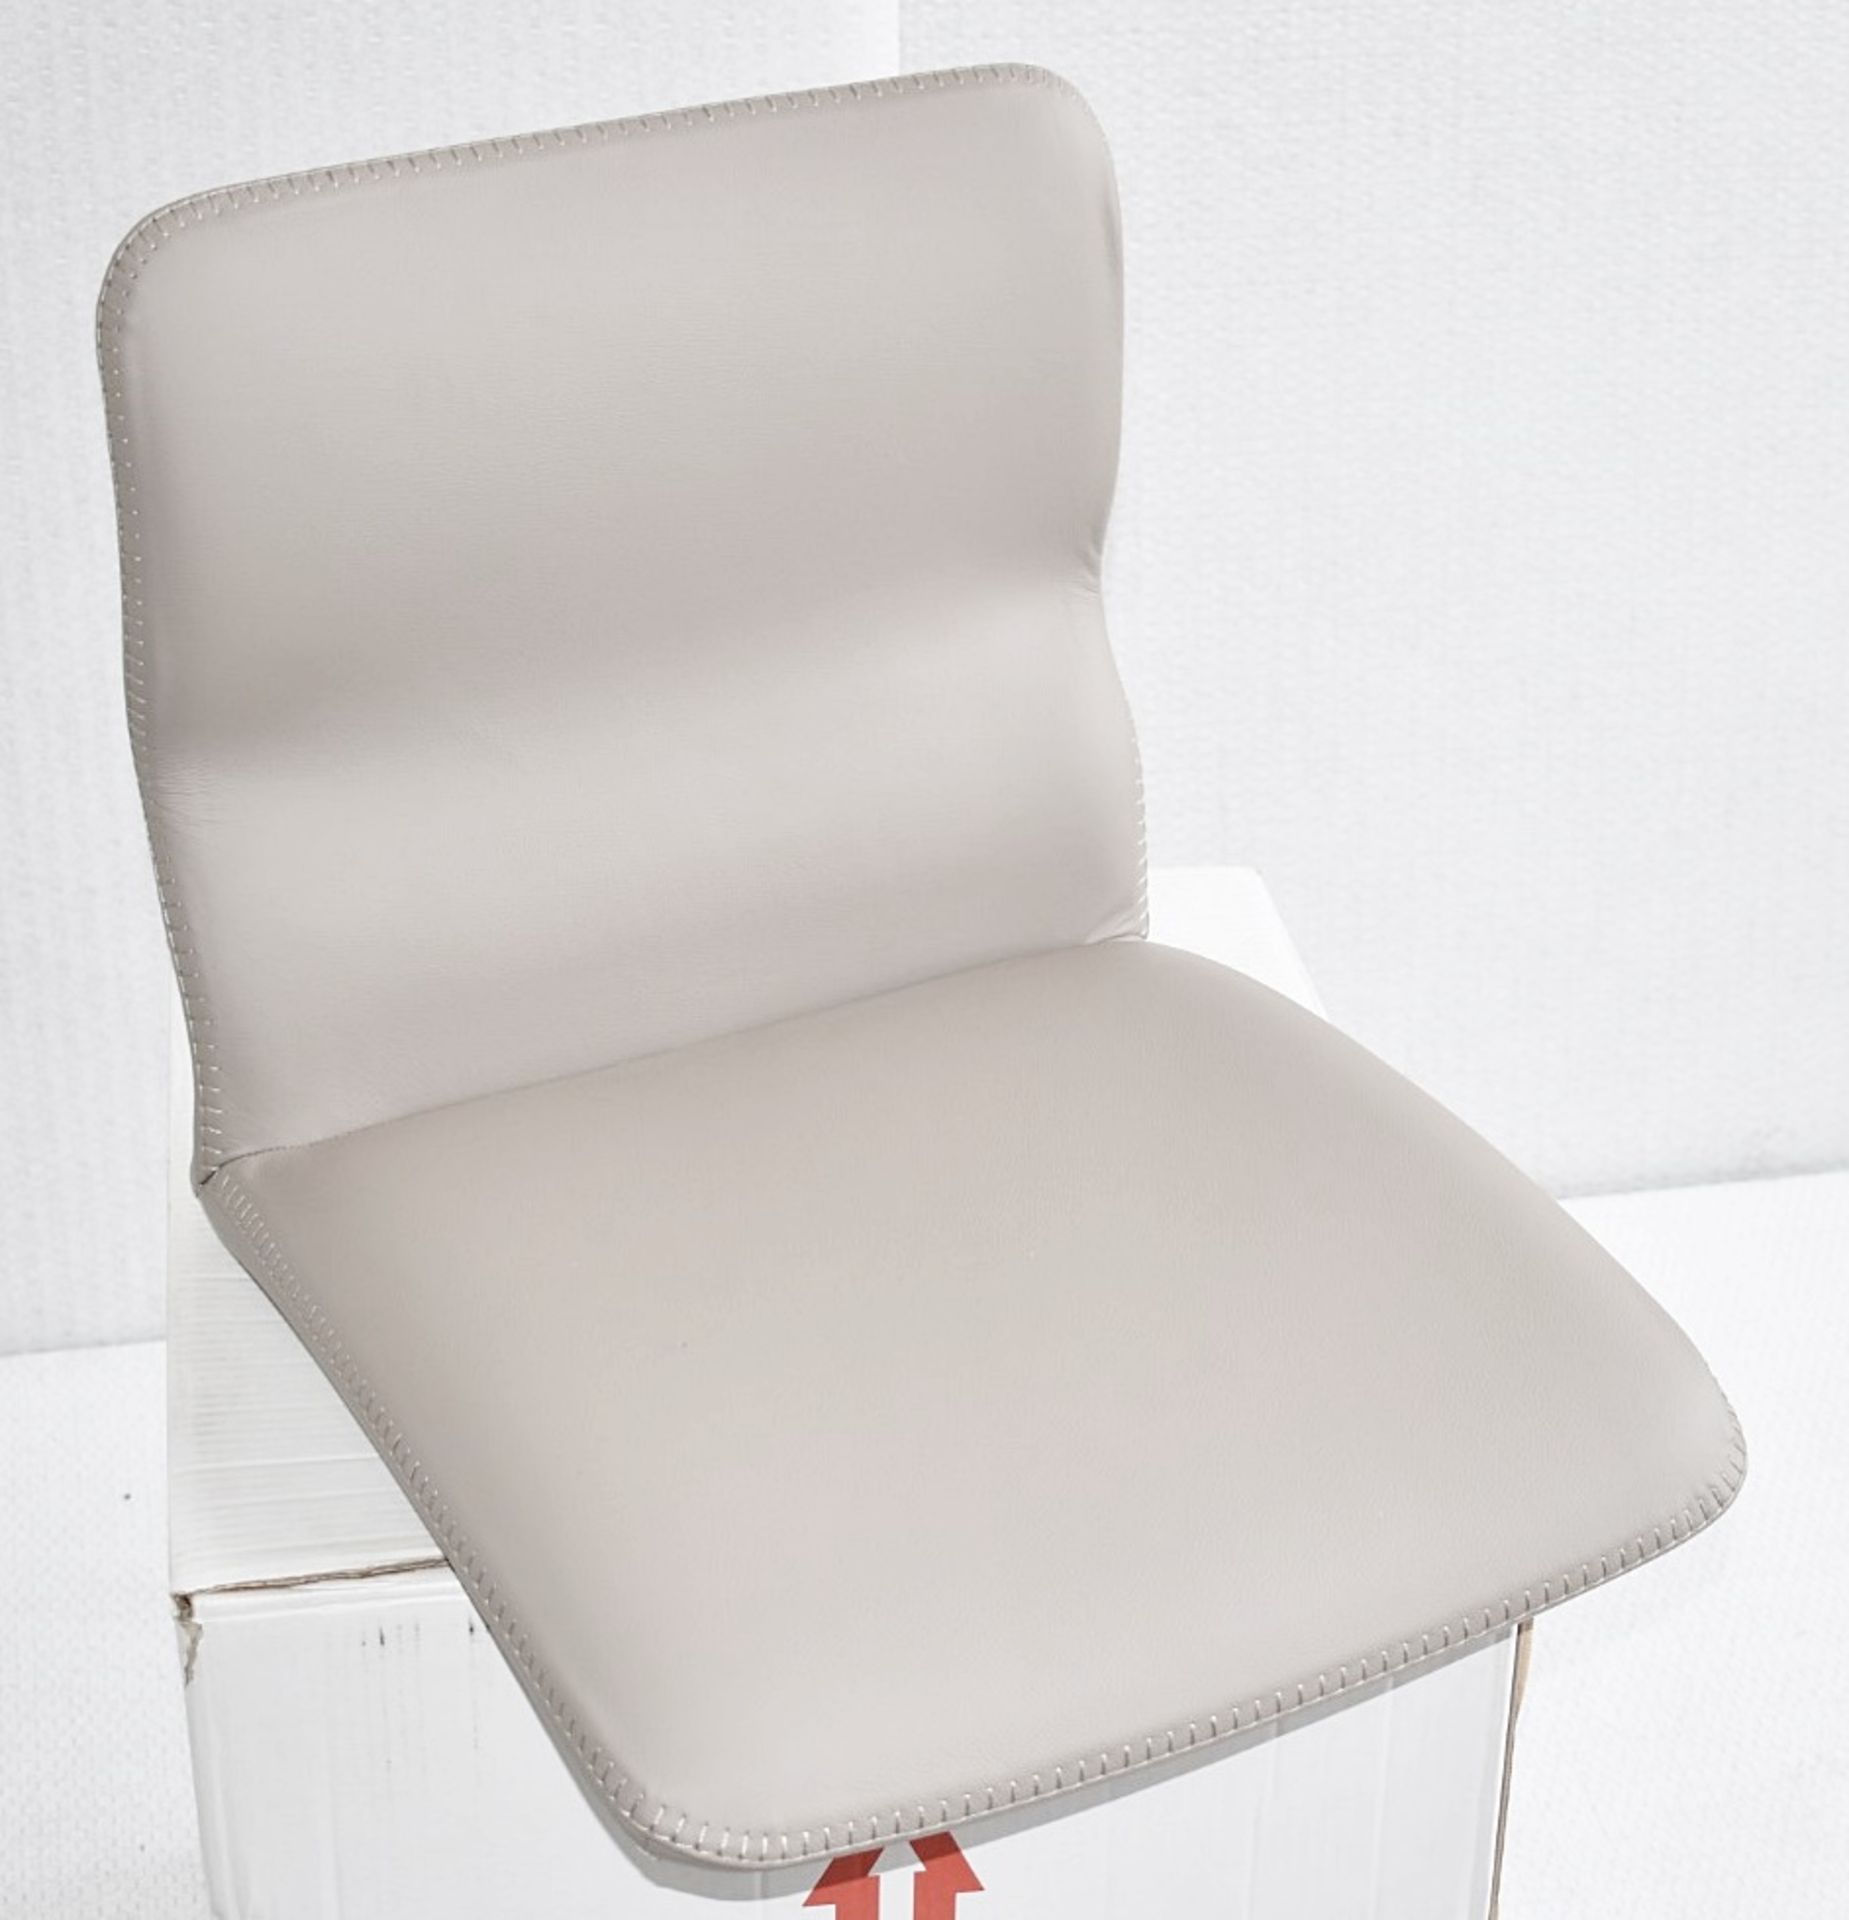 1 x CATTELAN ITALIA Designer Leather Upholstered Seat For Victor Stool, in Light Taupe - Image 4 of 7